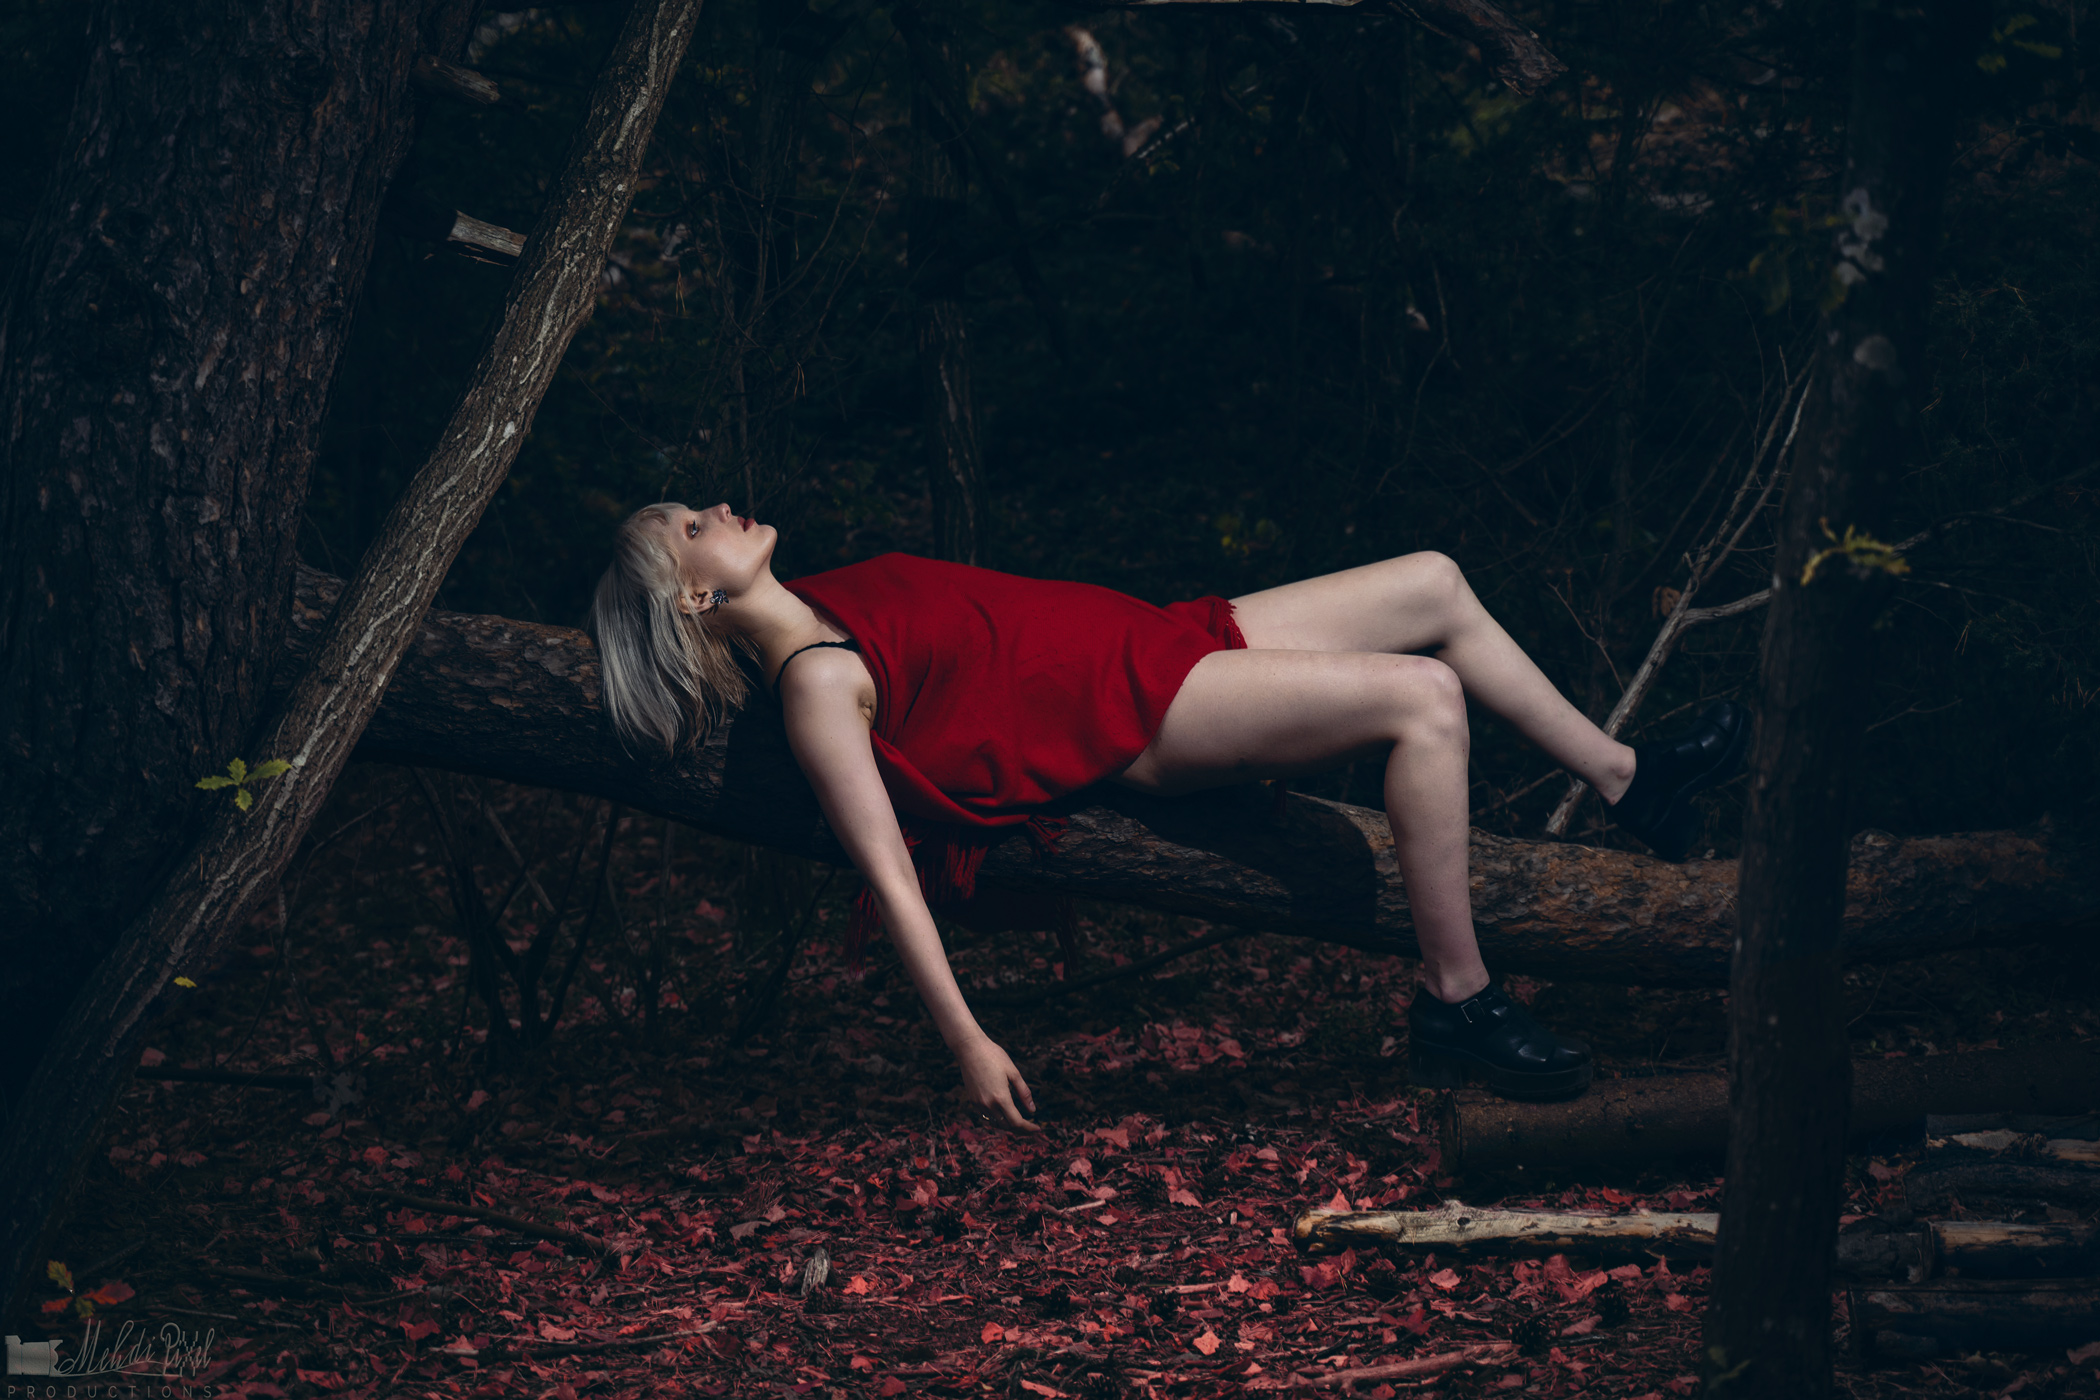 Girl in red lying on a tree in forest